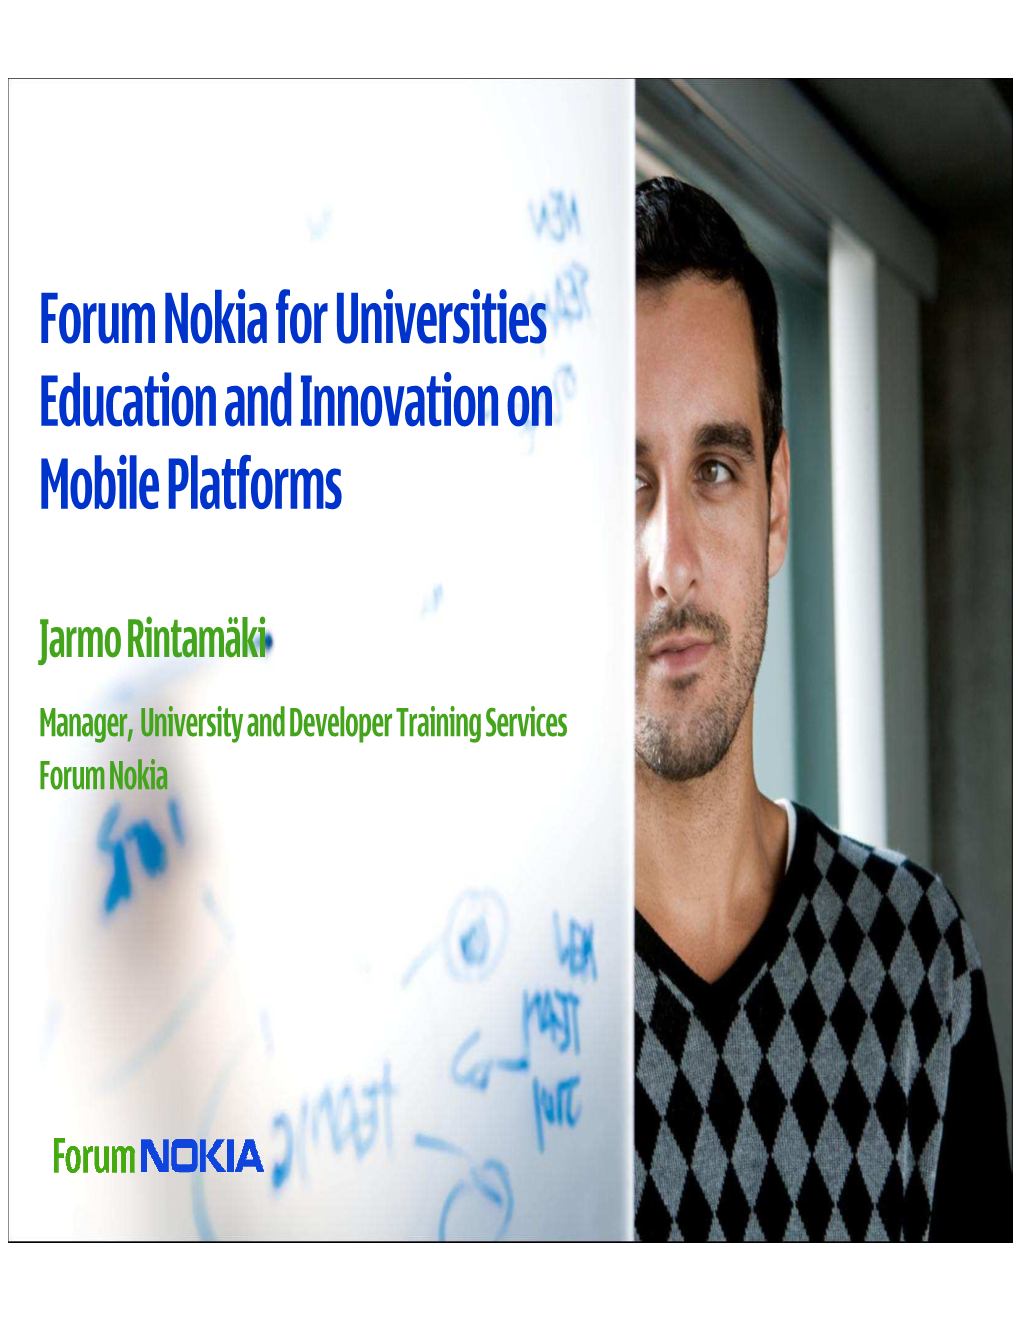 Forum Nokia for Universities Education and Innovation on Mobile Platforms